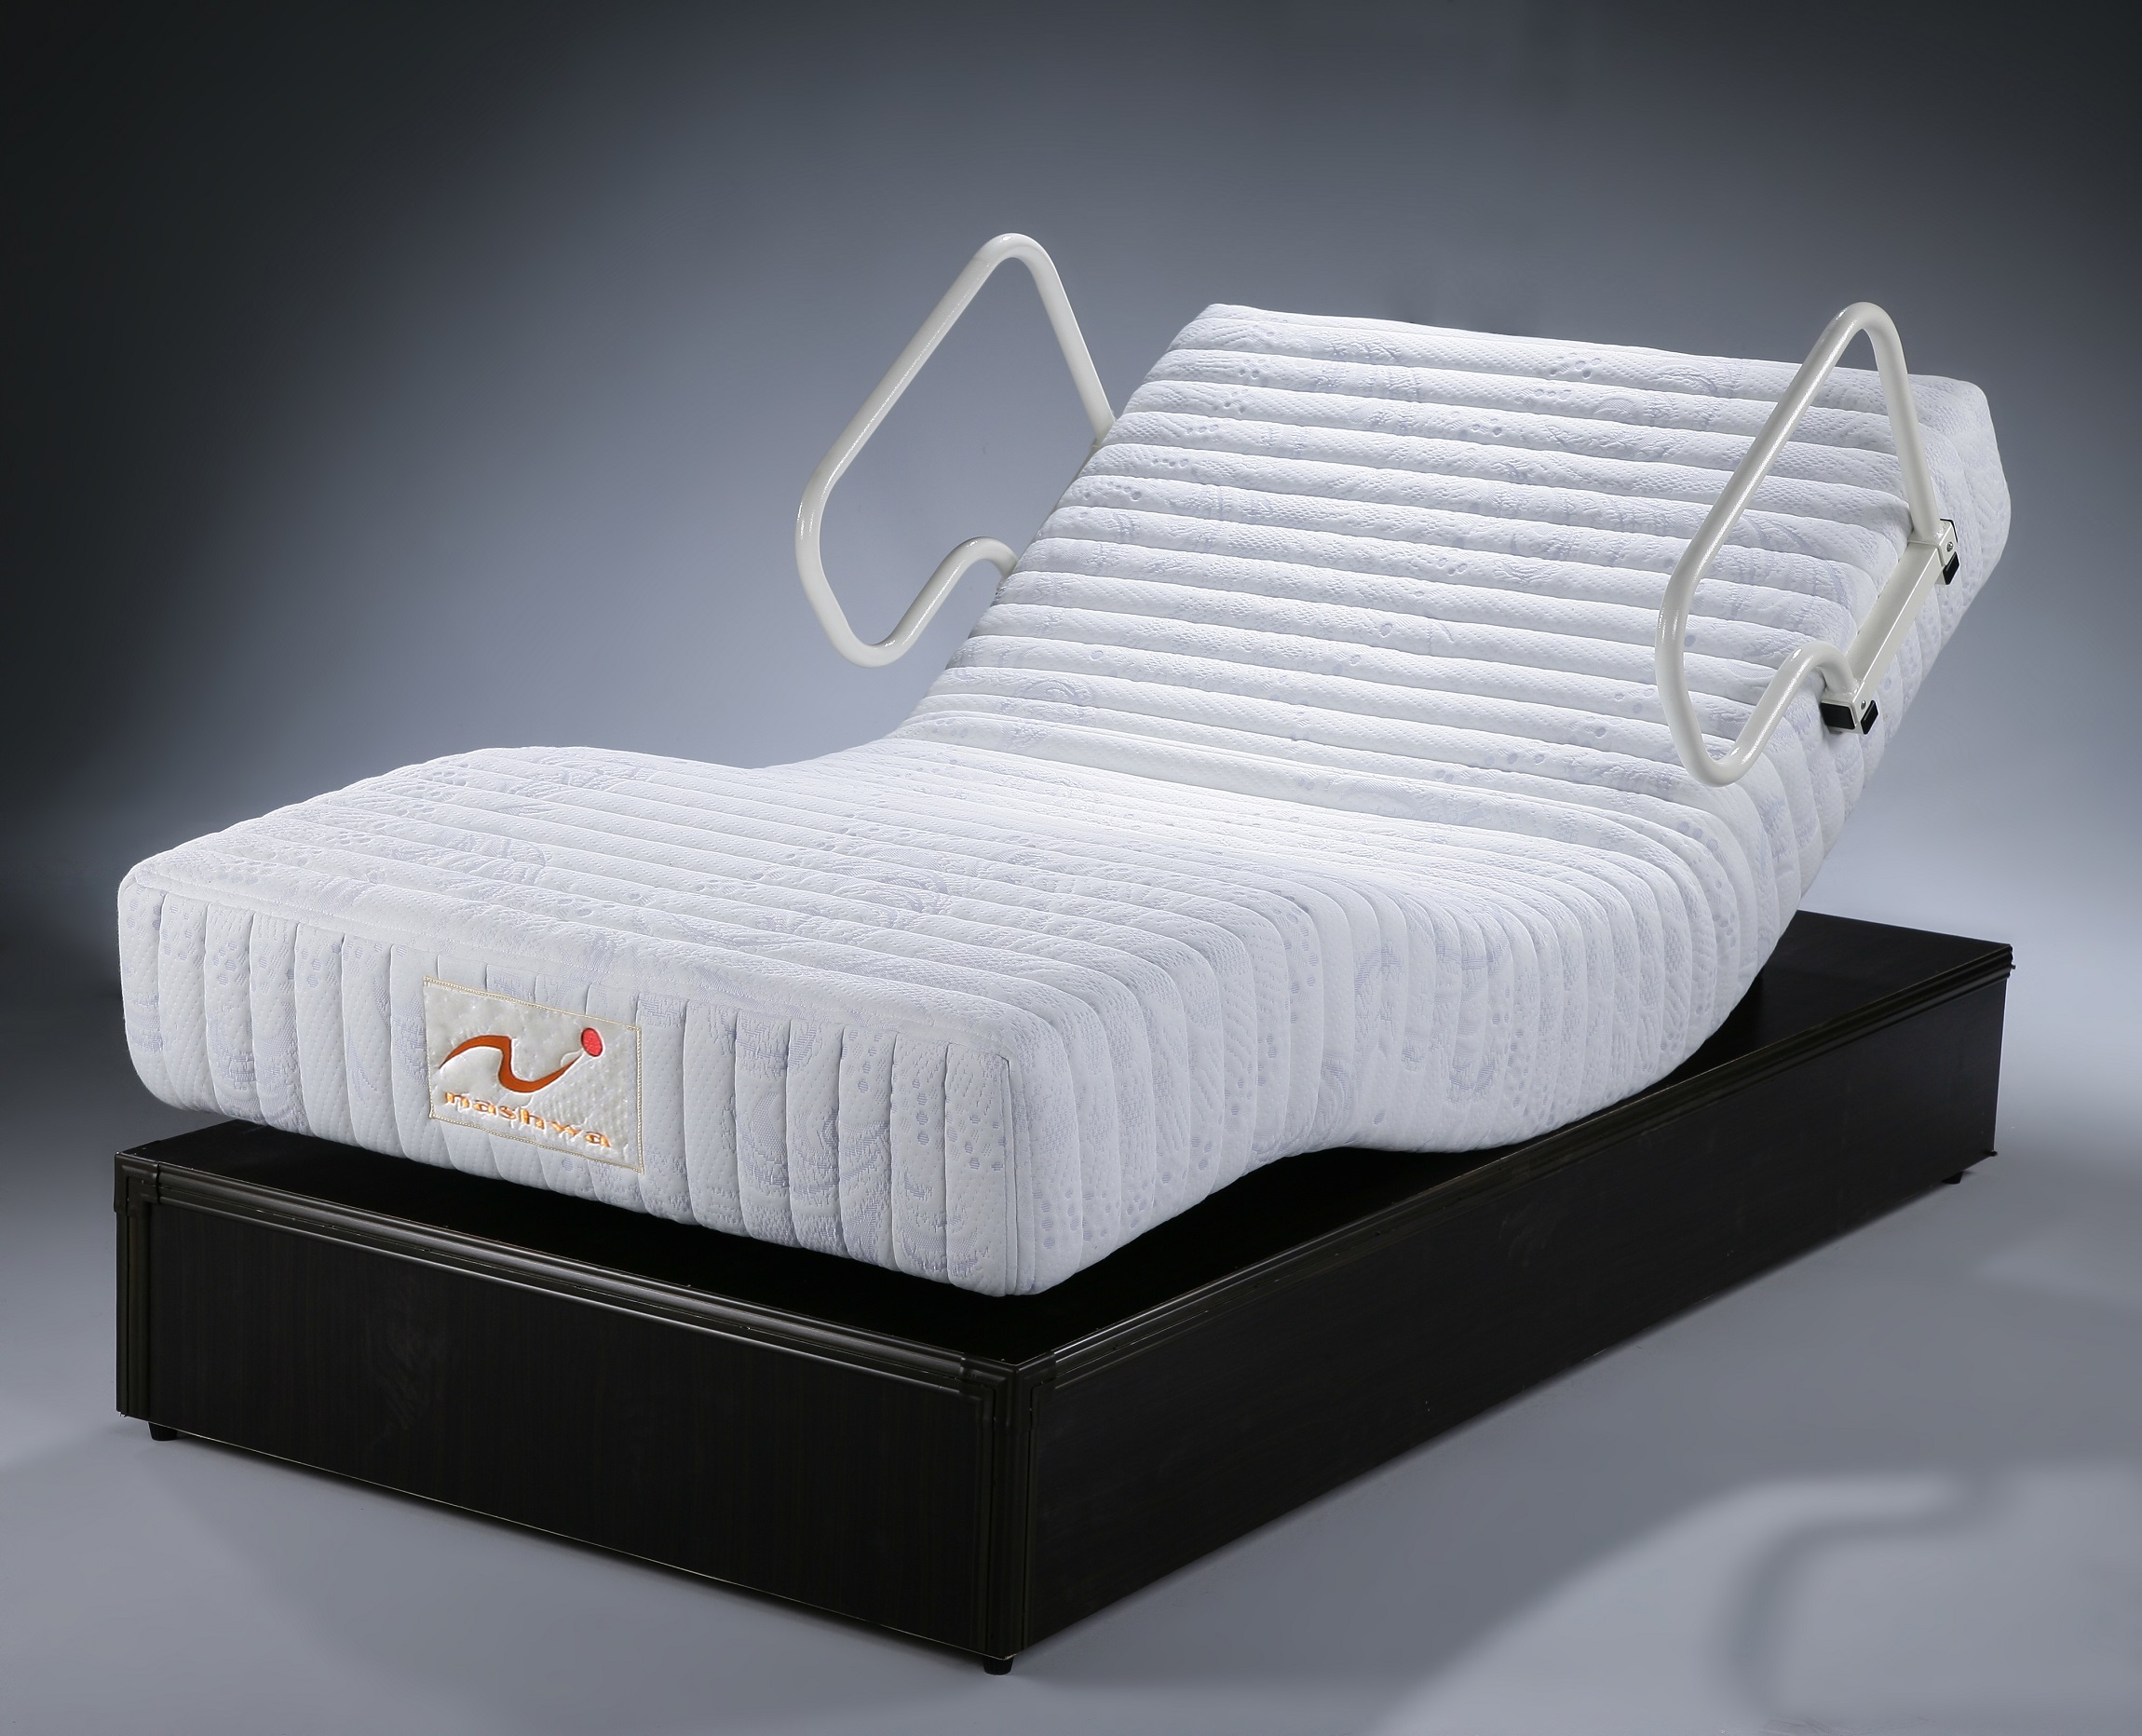 mattress for lositional beds